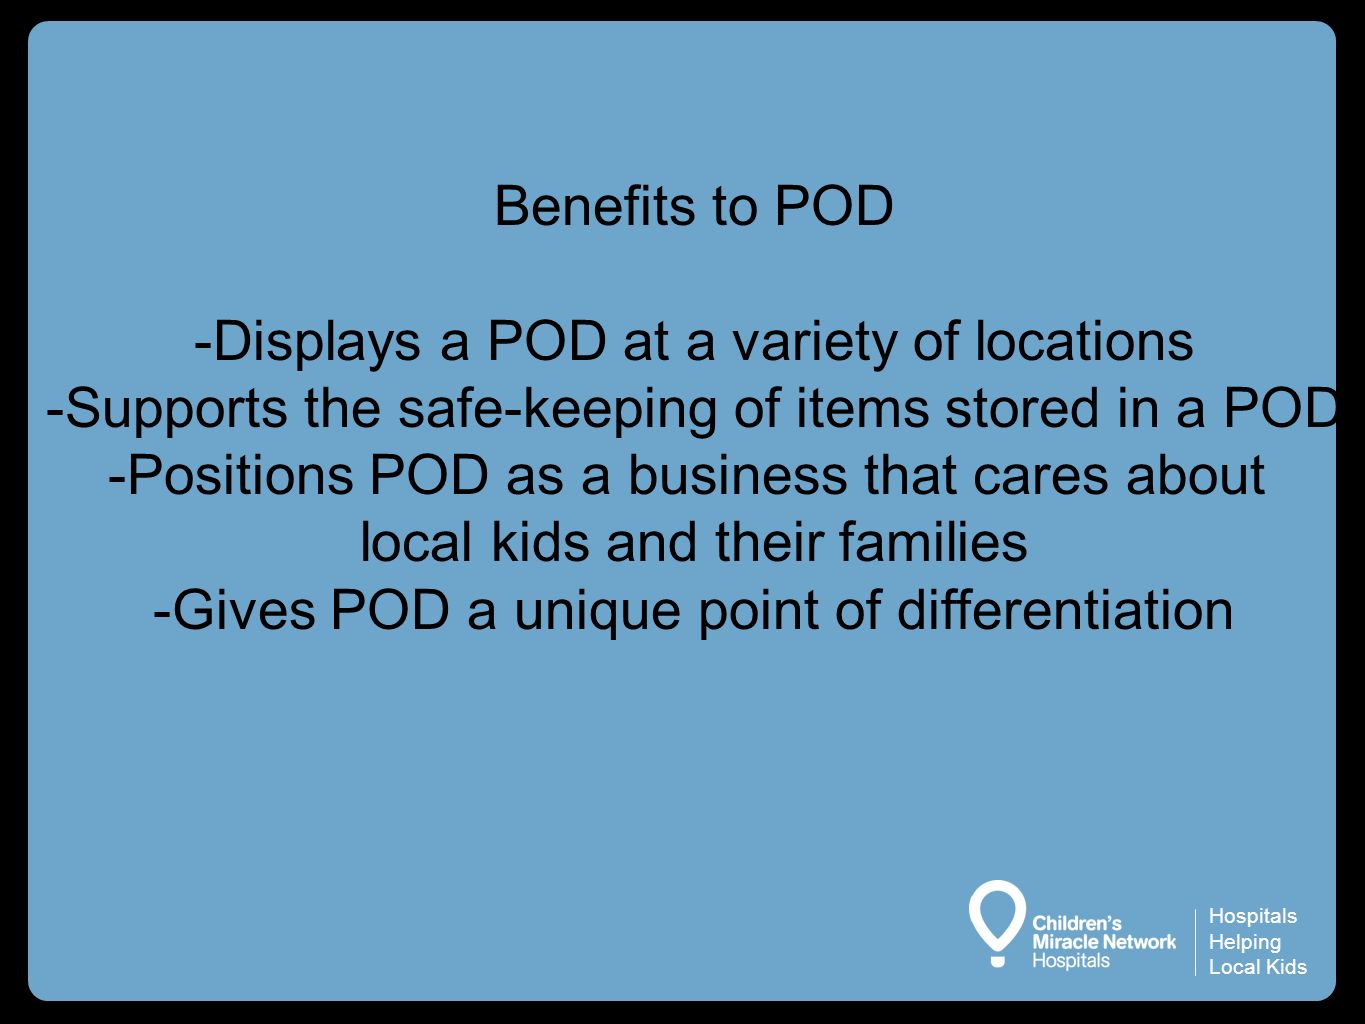 Hospitals Helping Local Kids Benefits to POD -Displays a POD at a variety of locations -Supports the safe-keeping of items stored in a POD -Positions POD as a business that cares about local kids and their families -Gives POD a unique point of differentiation